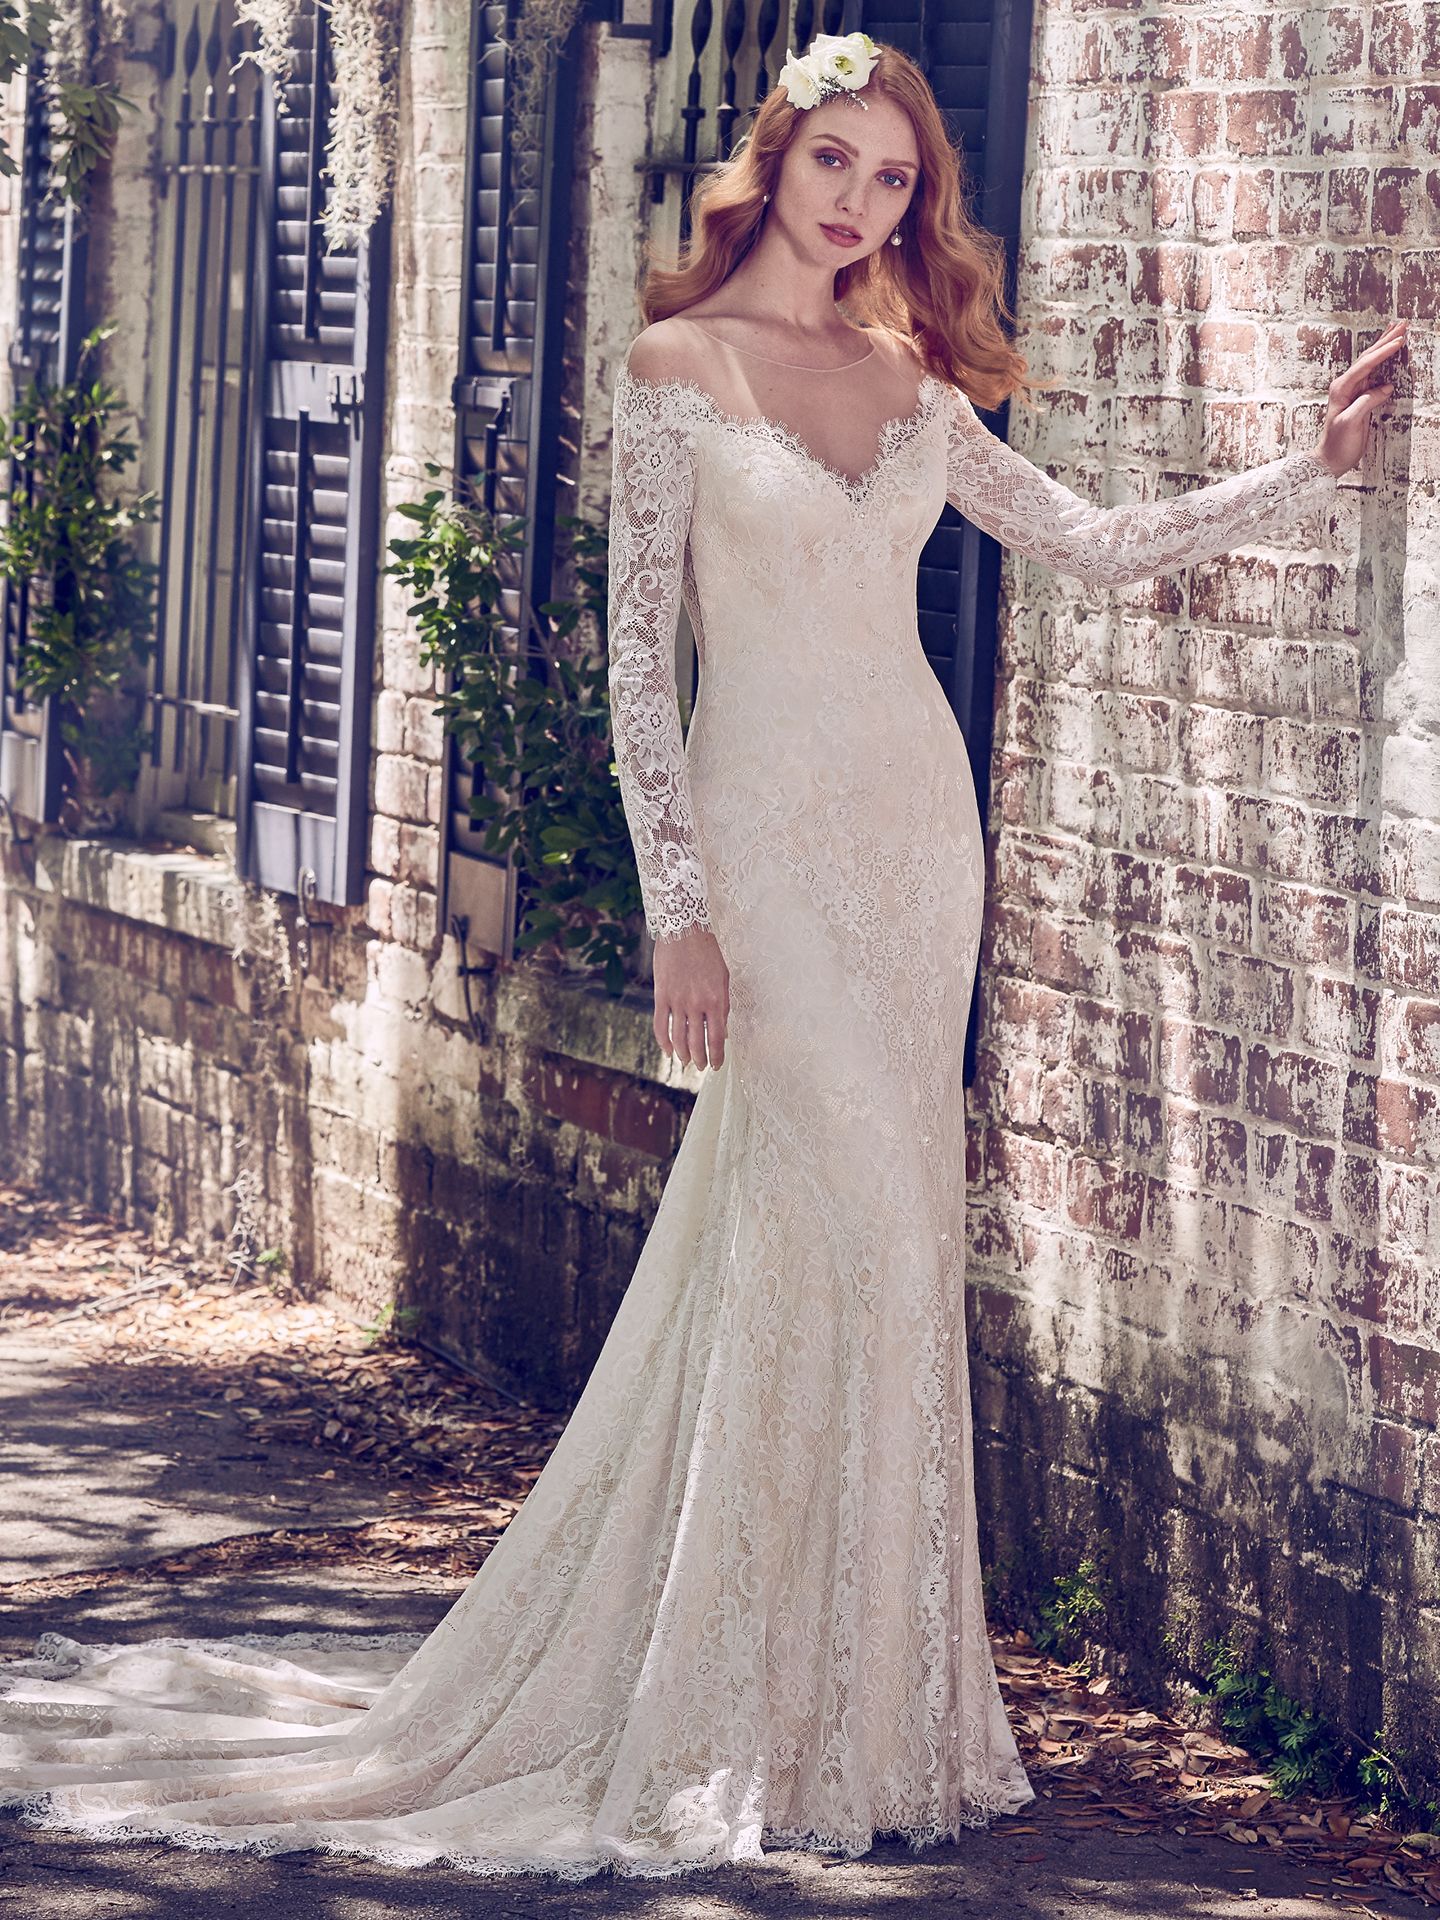 Types of Lace Wedding Dresses To Know When Shopping For A Wedding Dress: Maggie Sottero's Lace Library. Megan wedding dress by Maggie Sottero